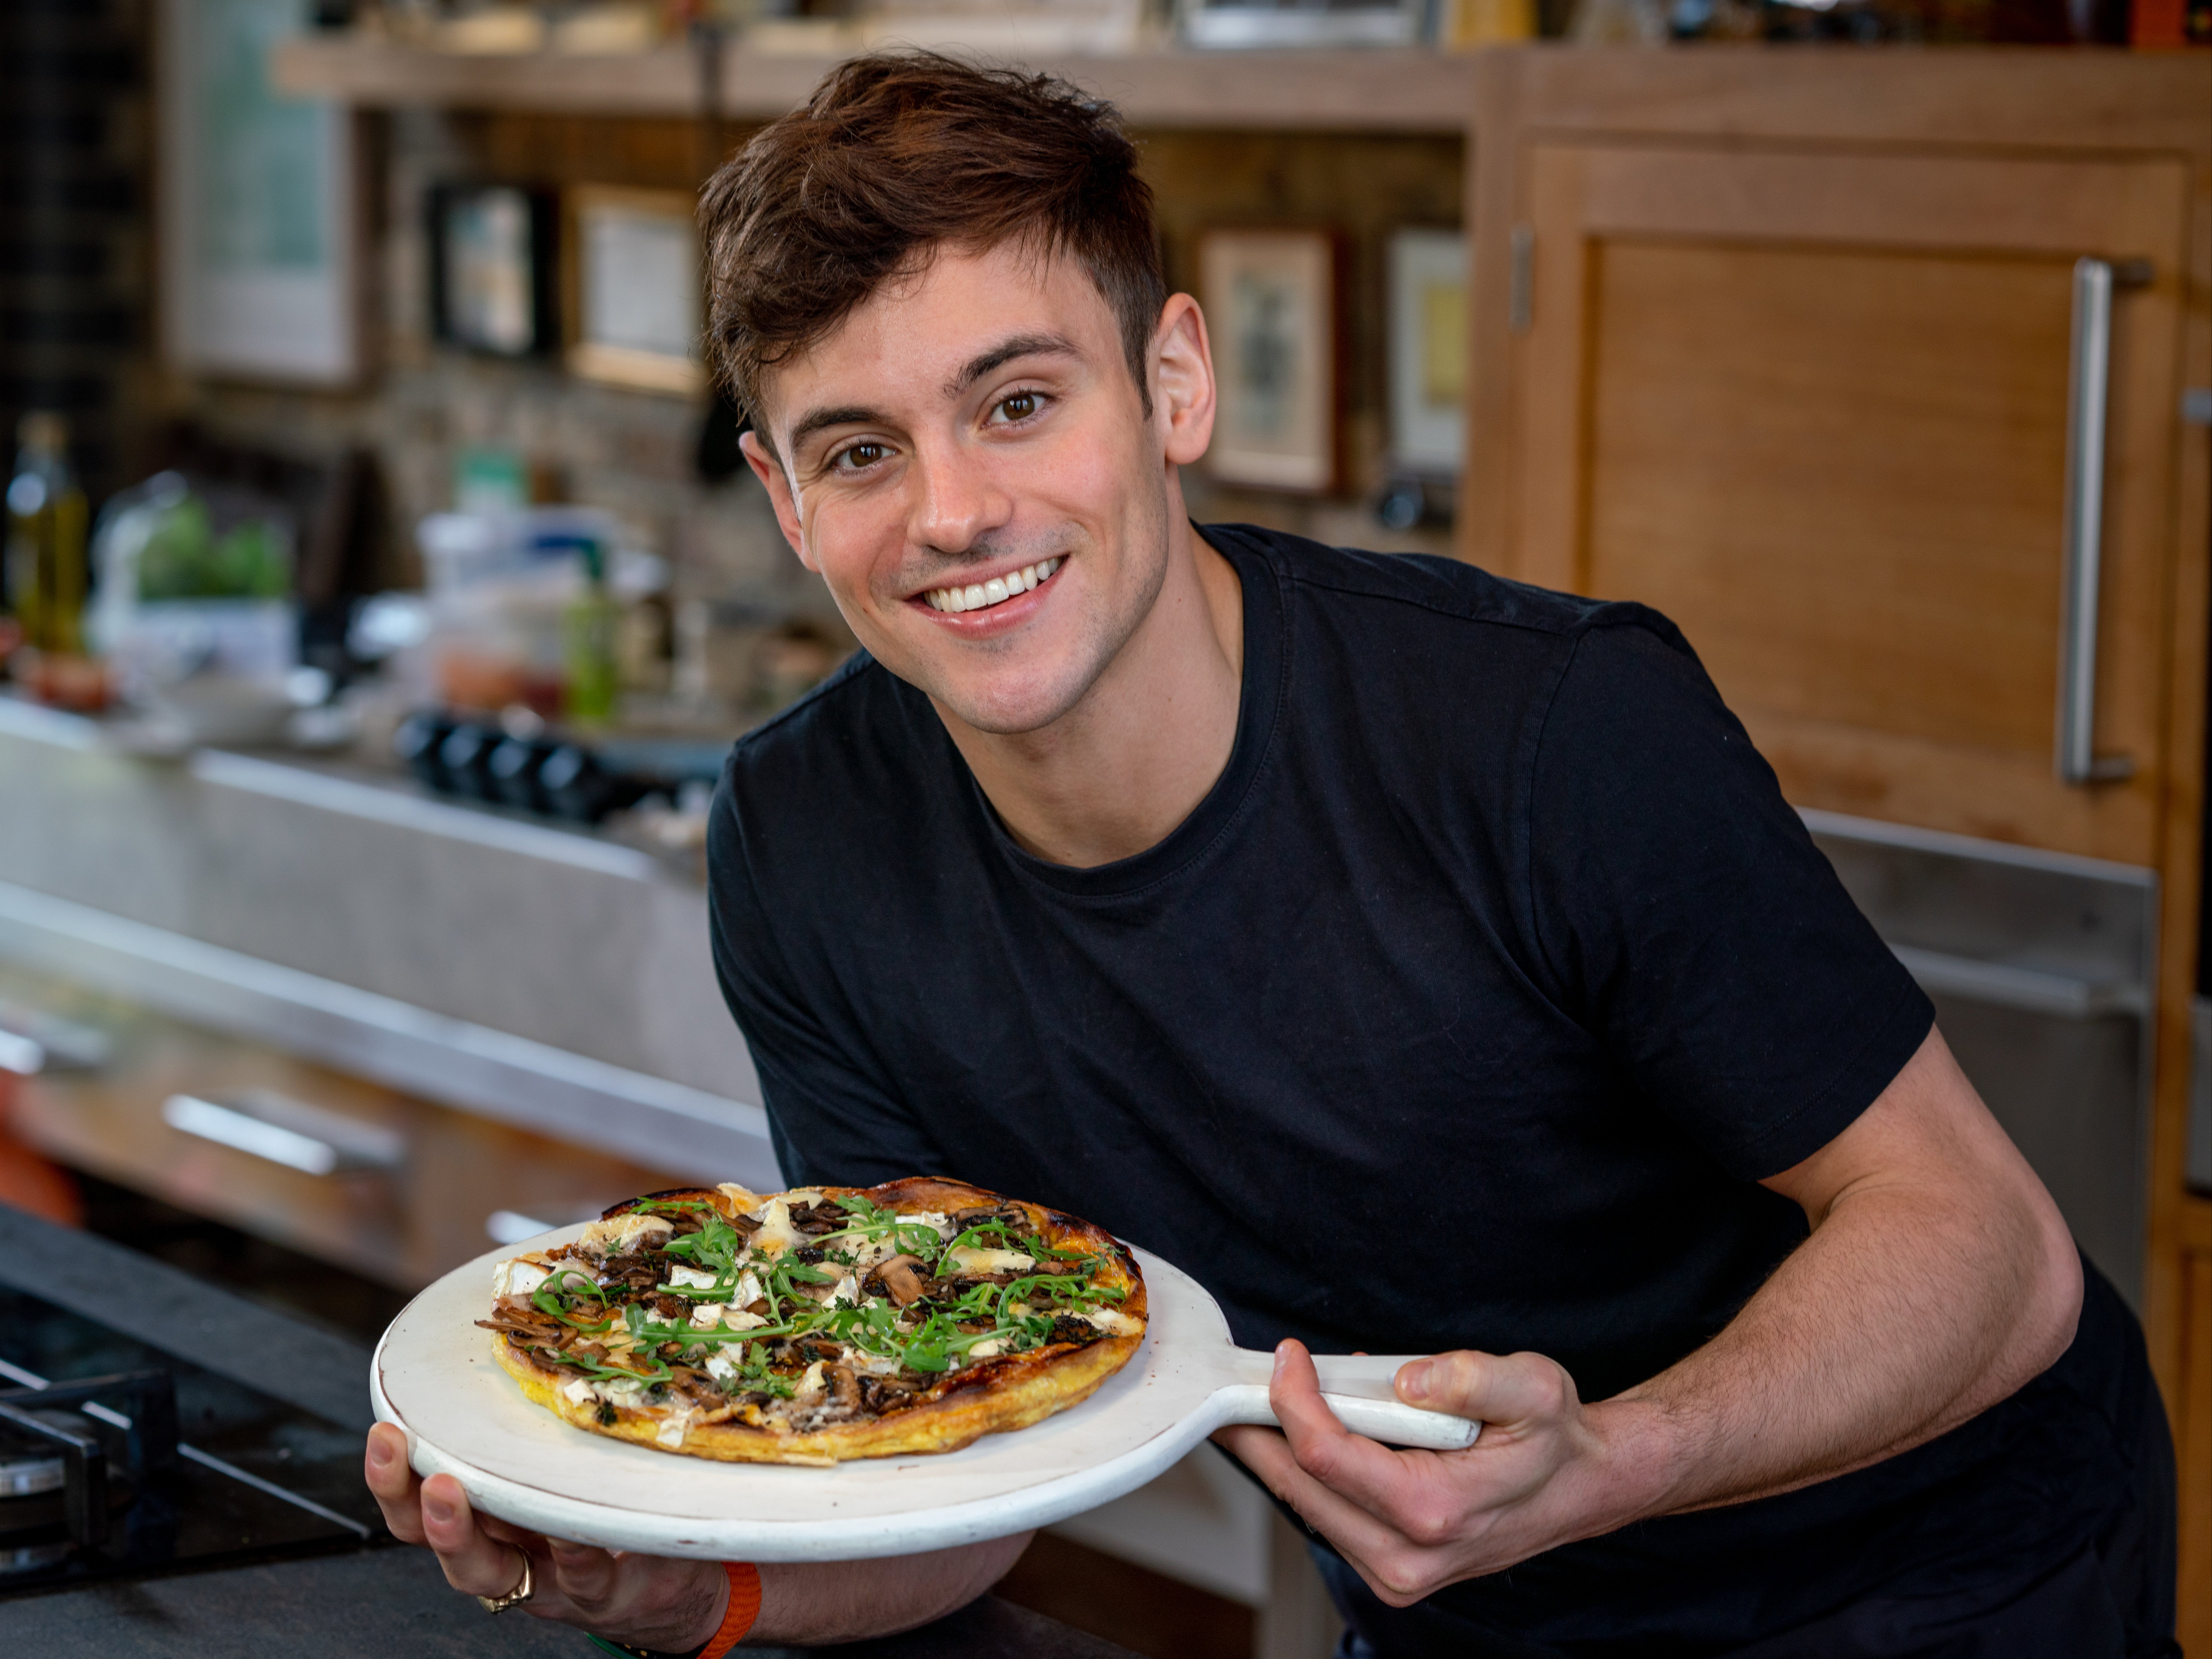 Tom Daley posts picture of his multi-sectioned frying pan on